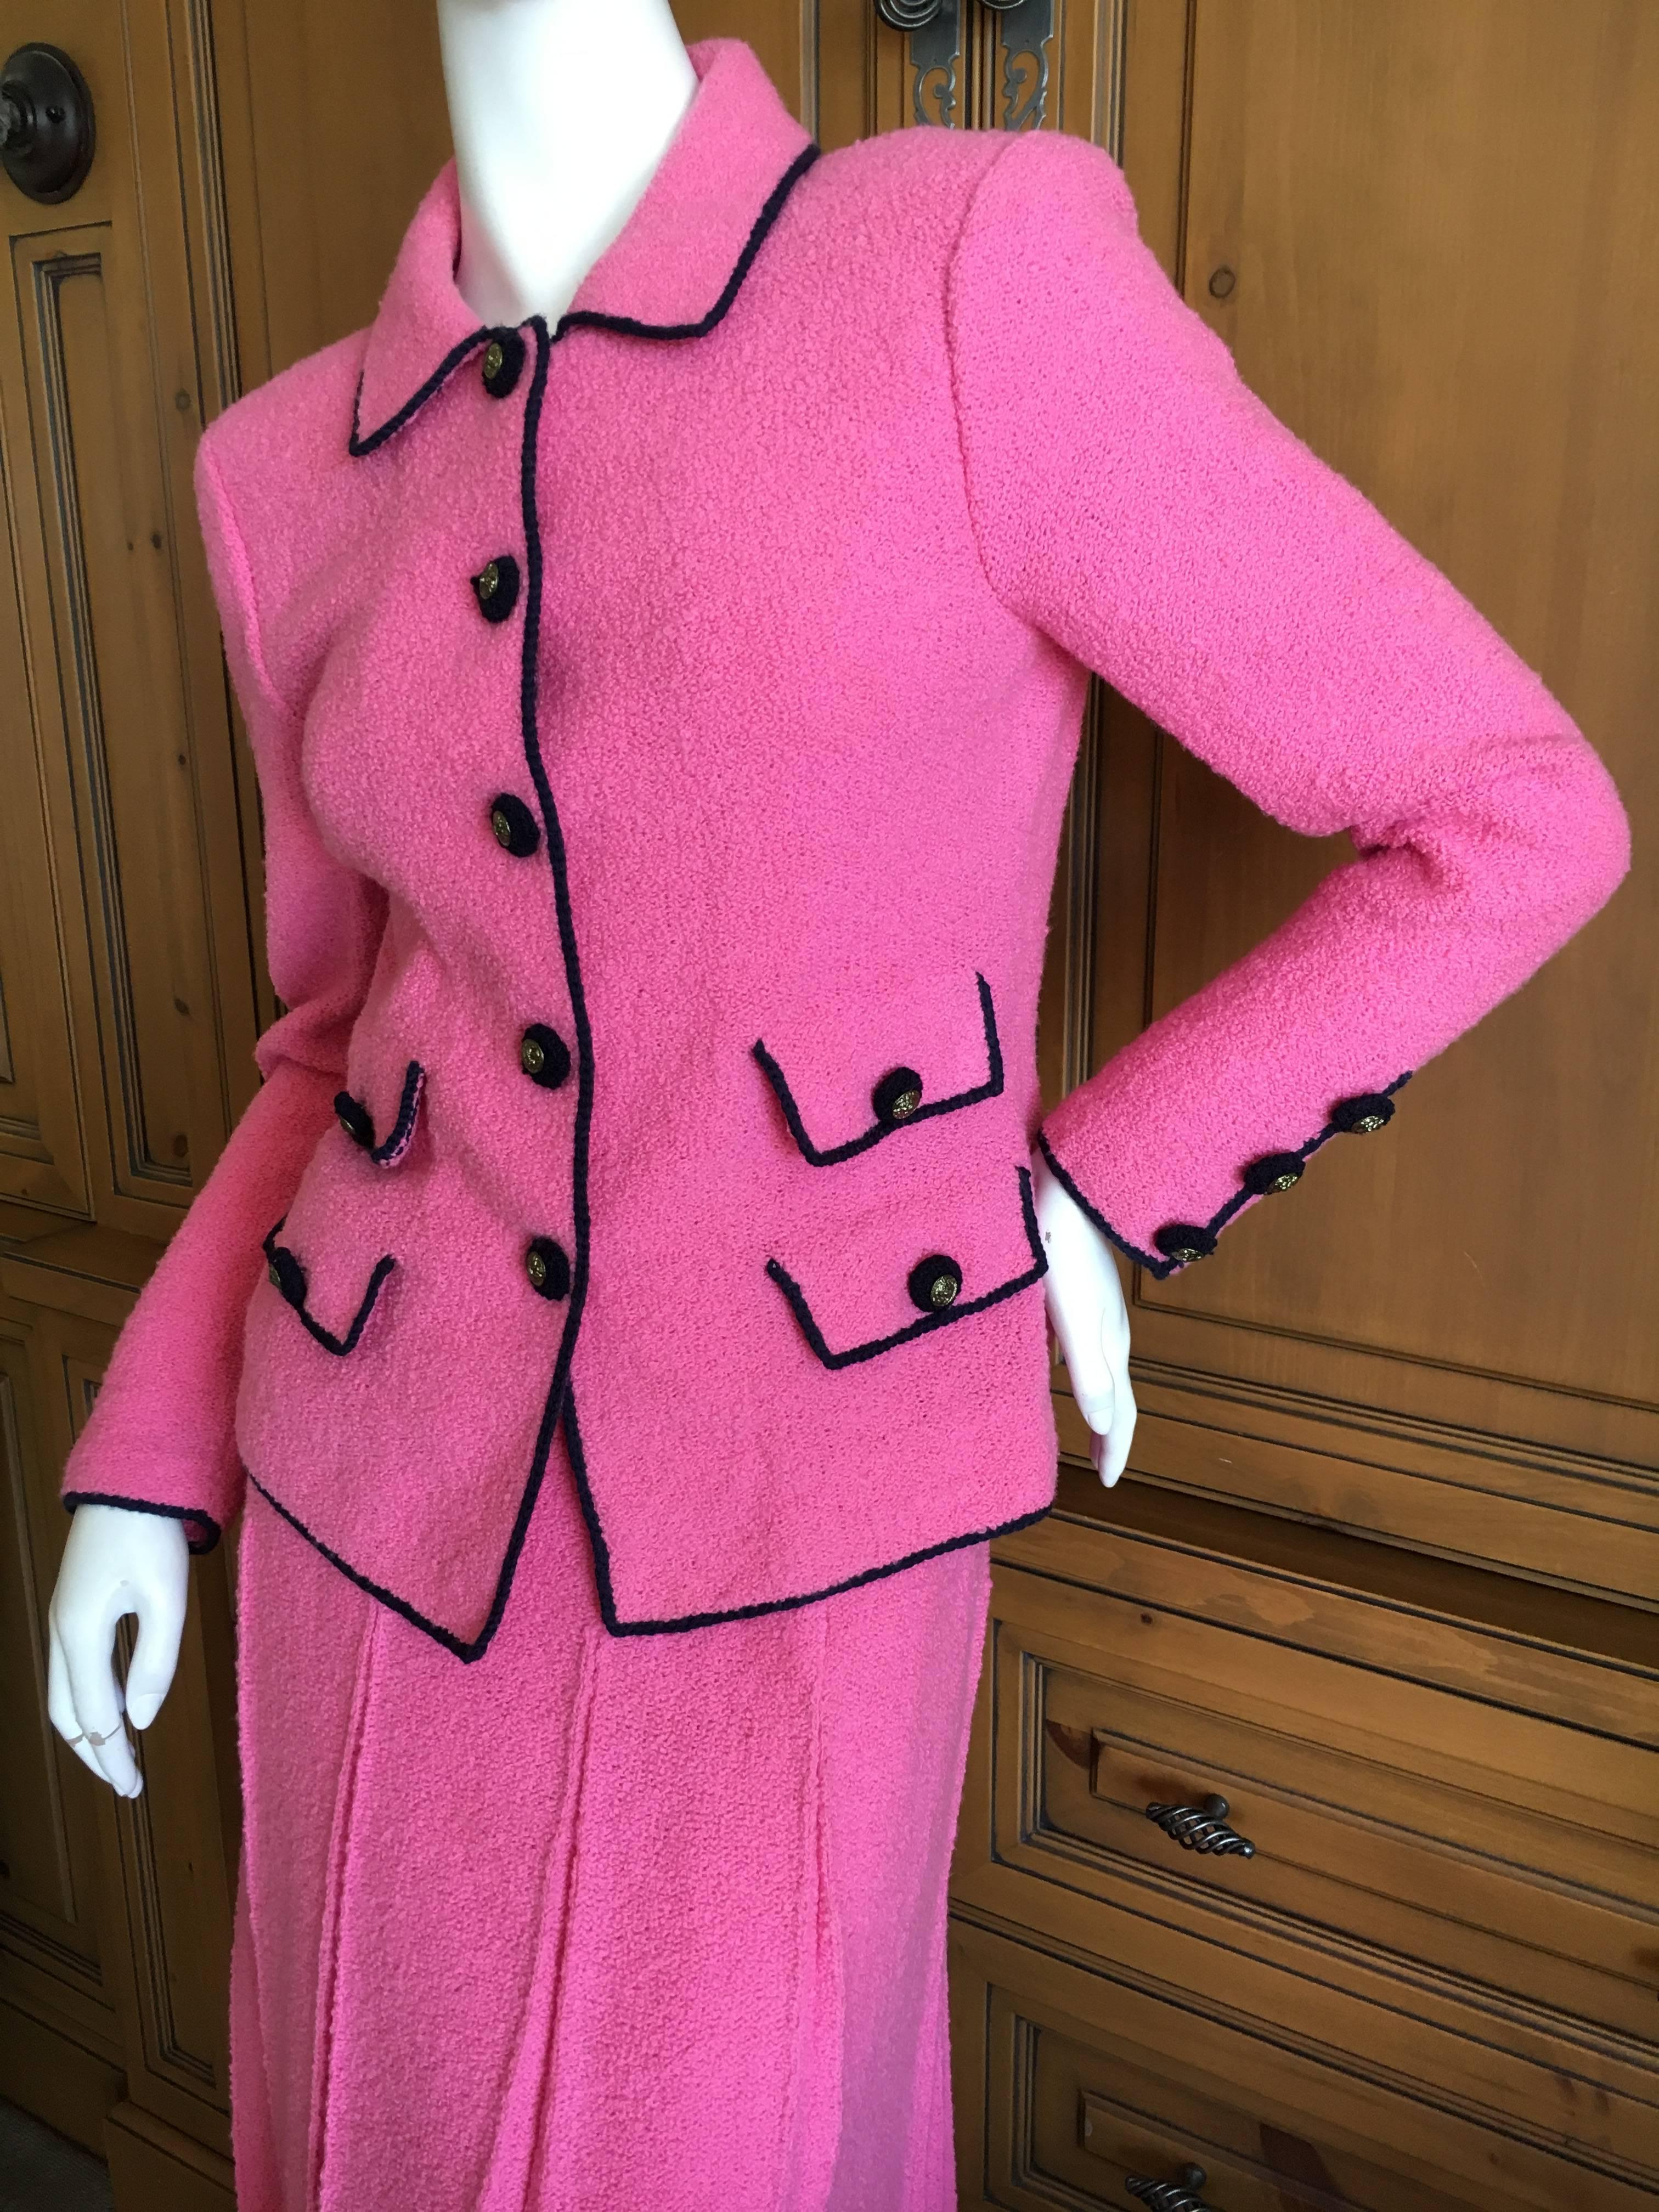 Wonderful knit suit from Adolfo for Saks Fifth Avenue, 1982.
Adolfo's suits were made so beautifully, the attention to detail ,many finishes done by hand.
There is a lot of stretch, it is a knit.
Bust 40